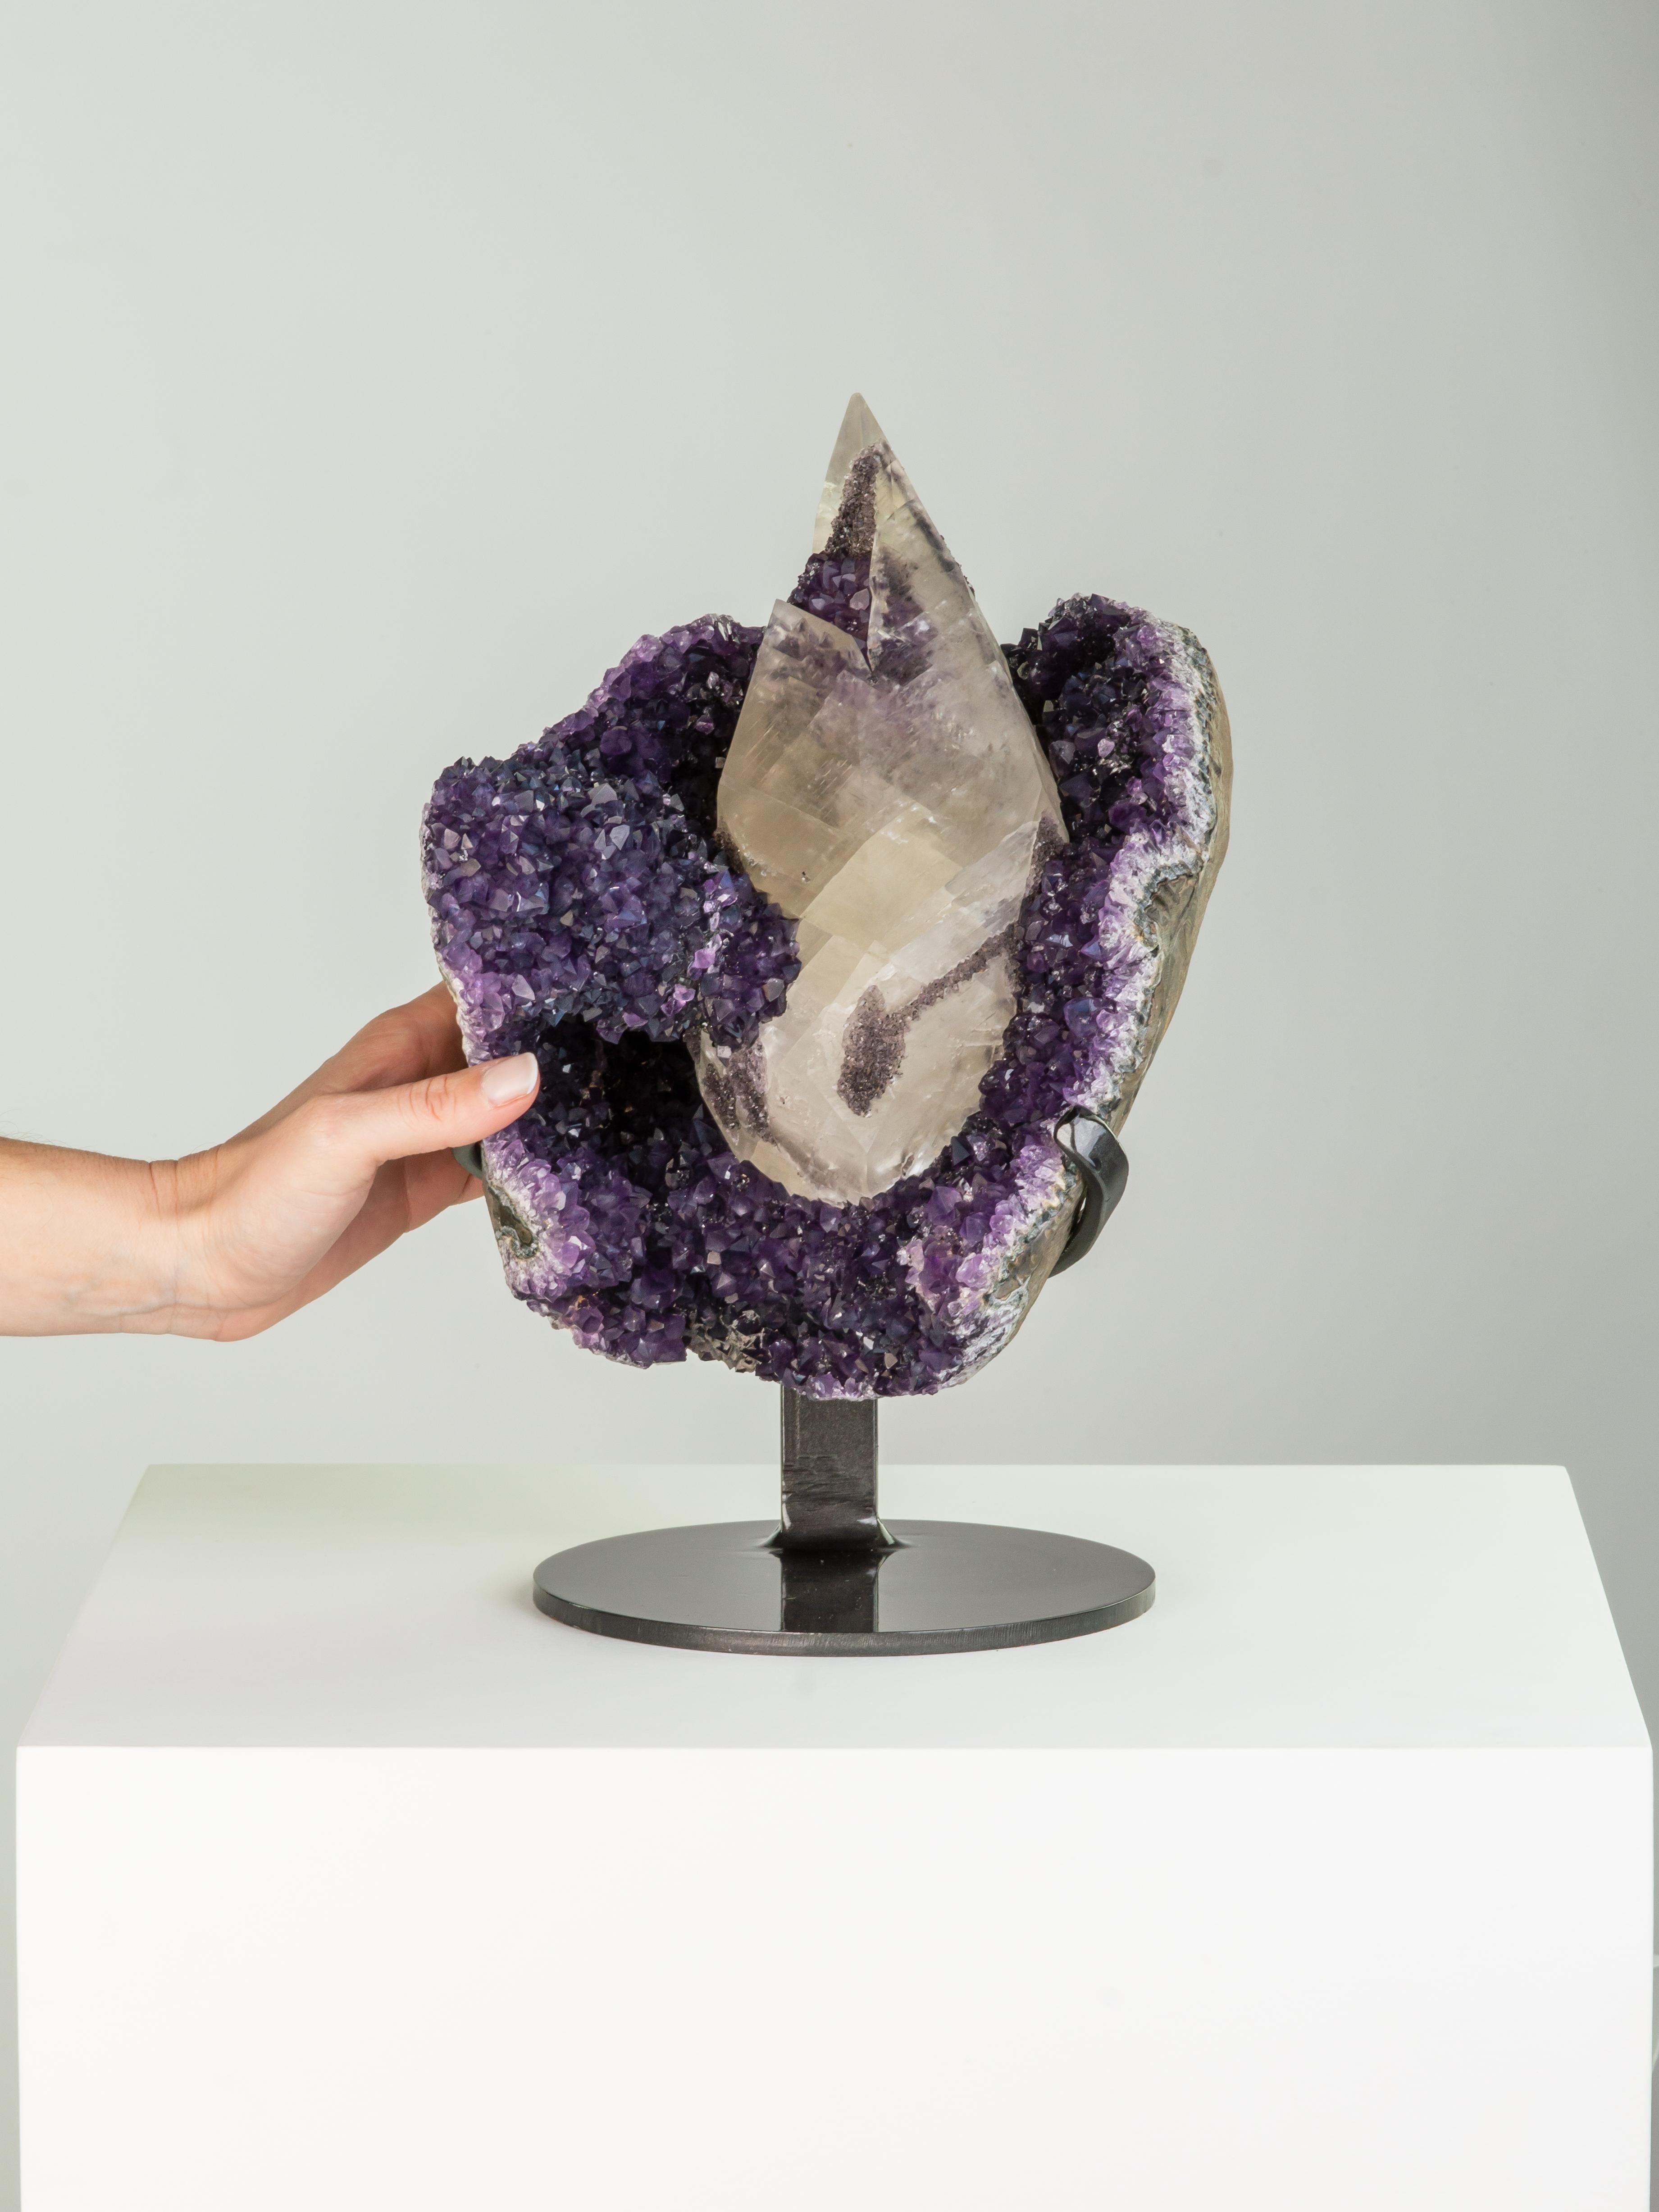 This stunning formation consists of a large pyramidal calcite on a bed of
deep purple amethyst. The split calcite with unusual epitaxial goethite
and a second generation of amethyst growth near the top. A wonderful
piece.

This piece was